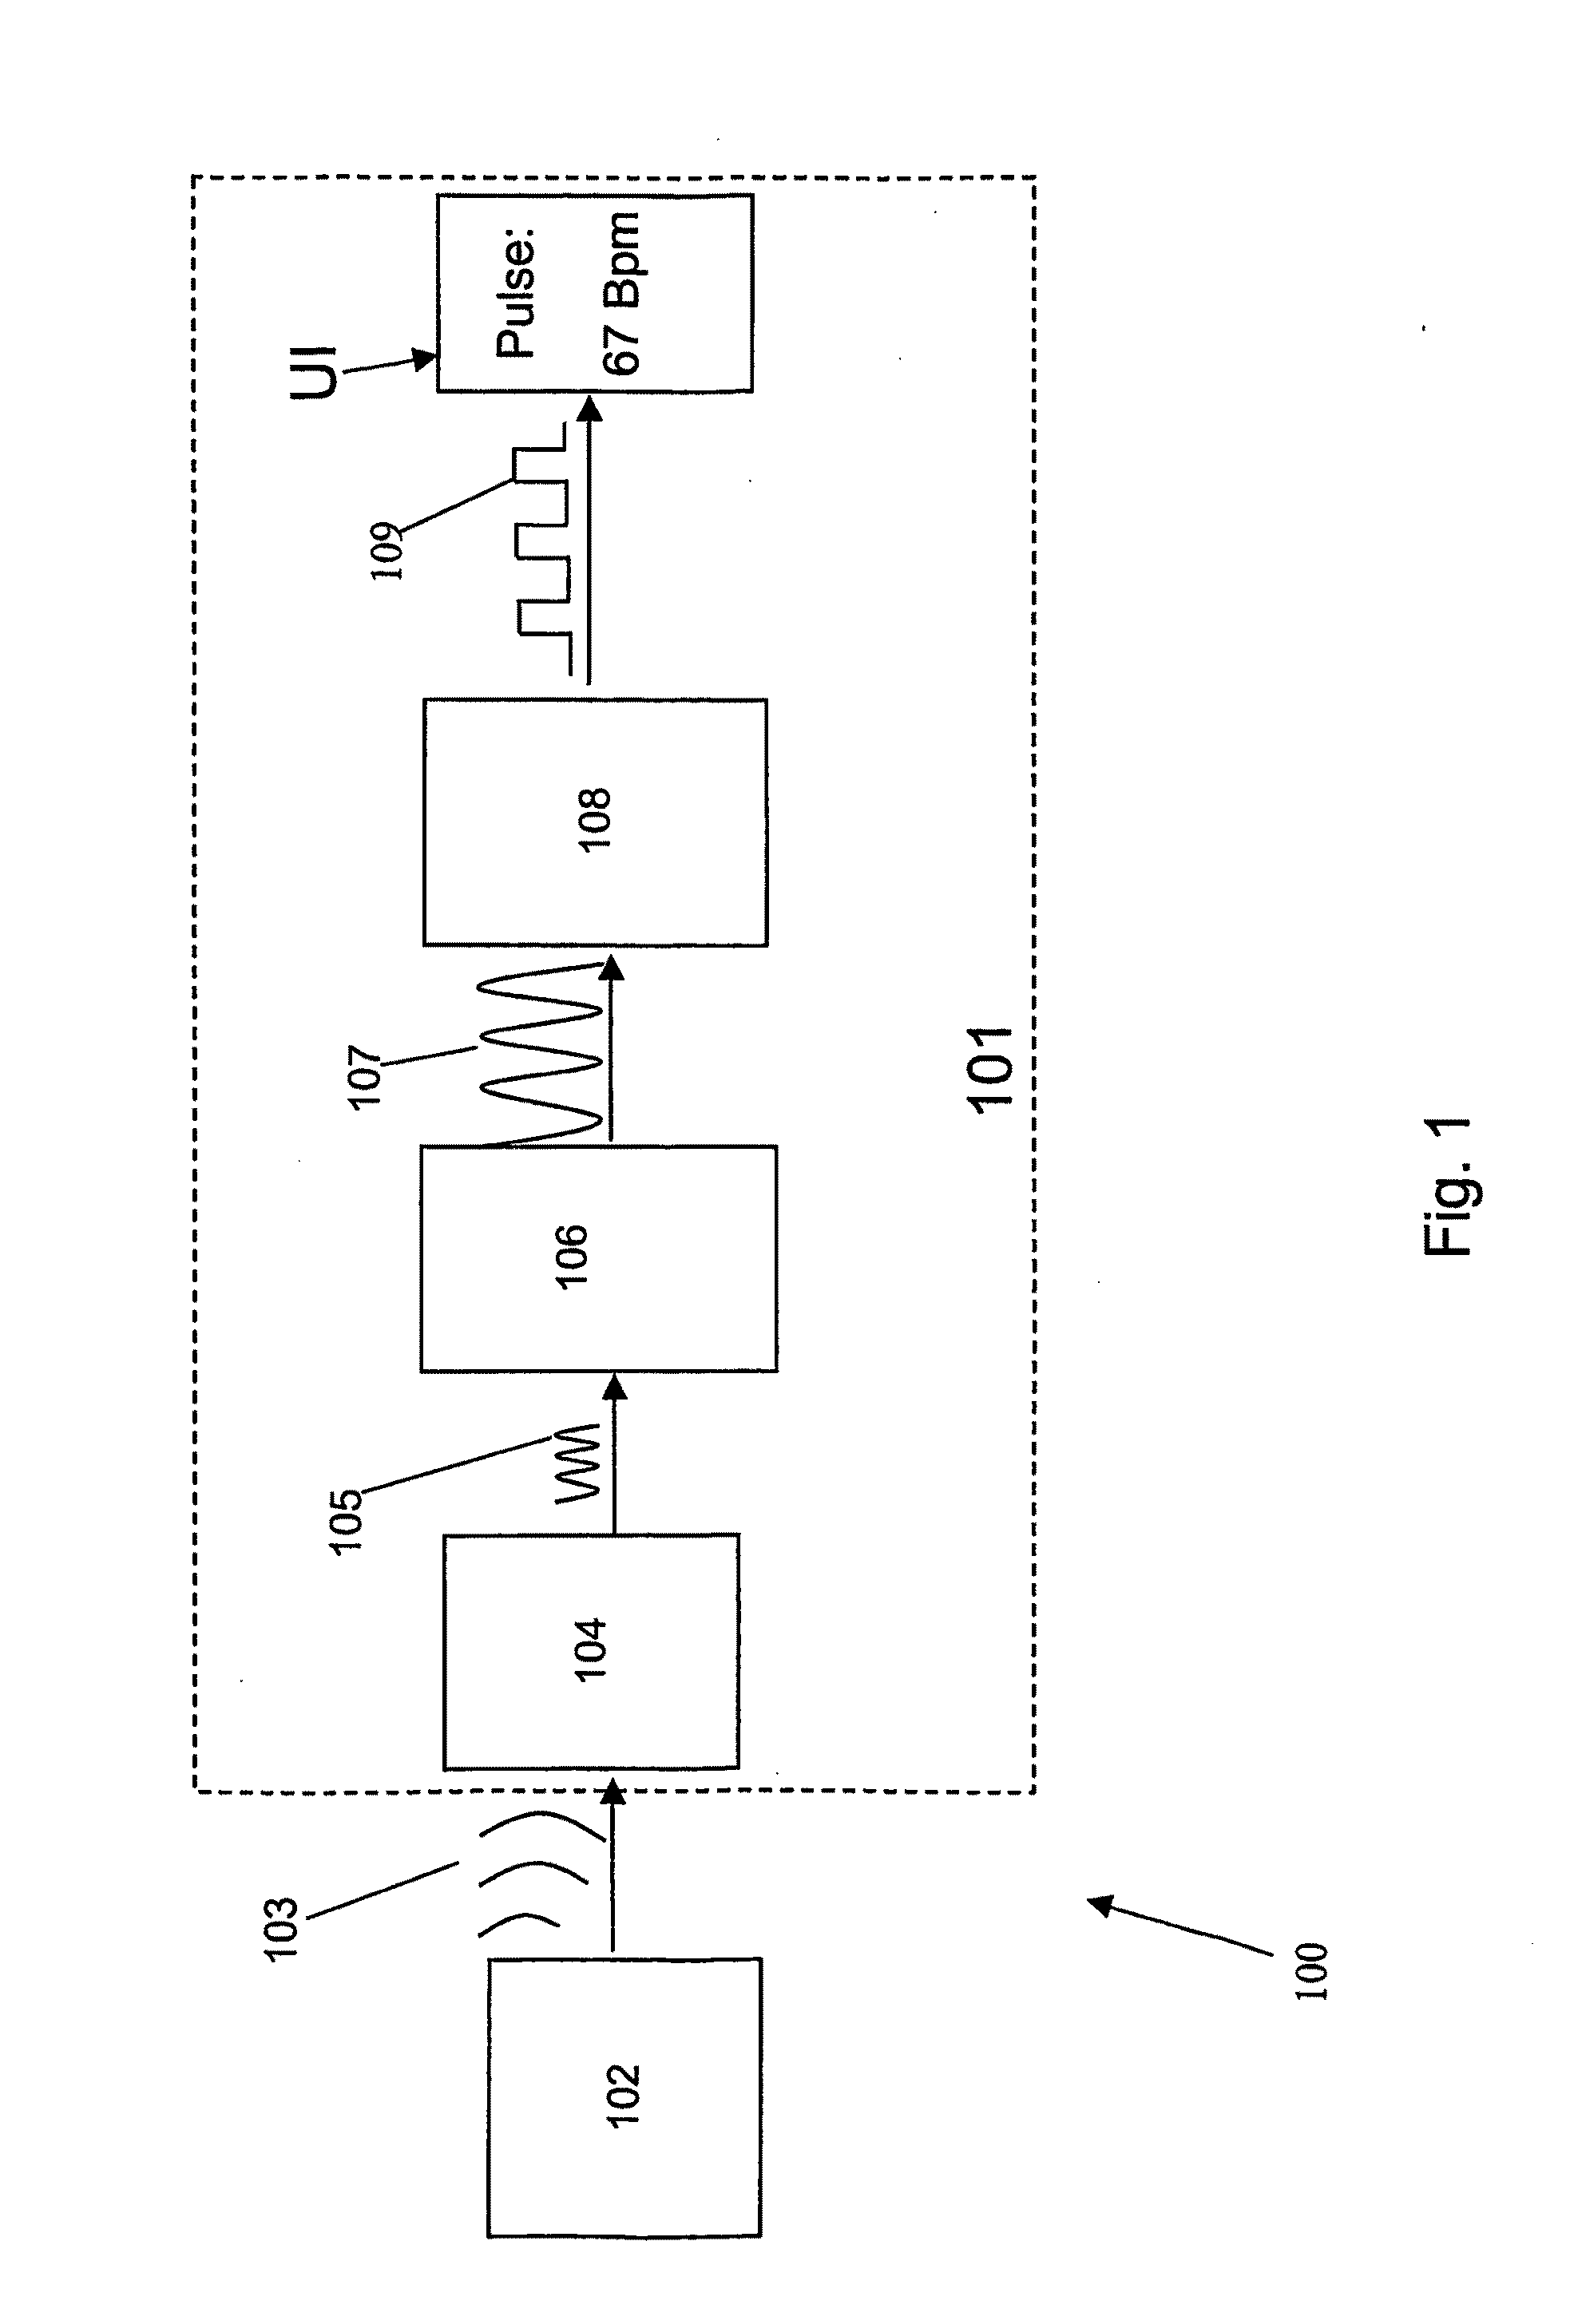 Apparatus for Detecting Body Condition